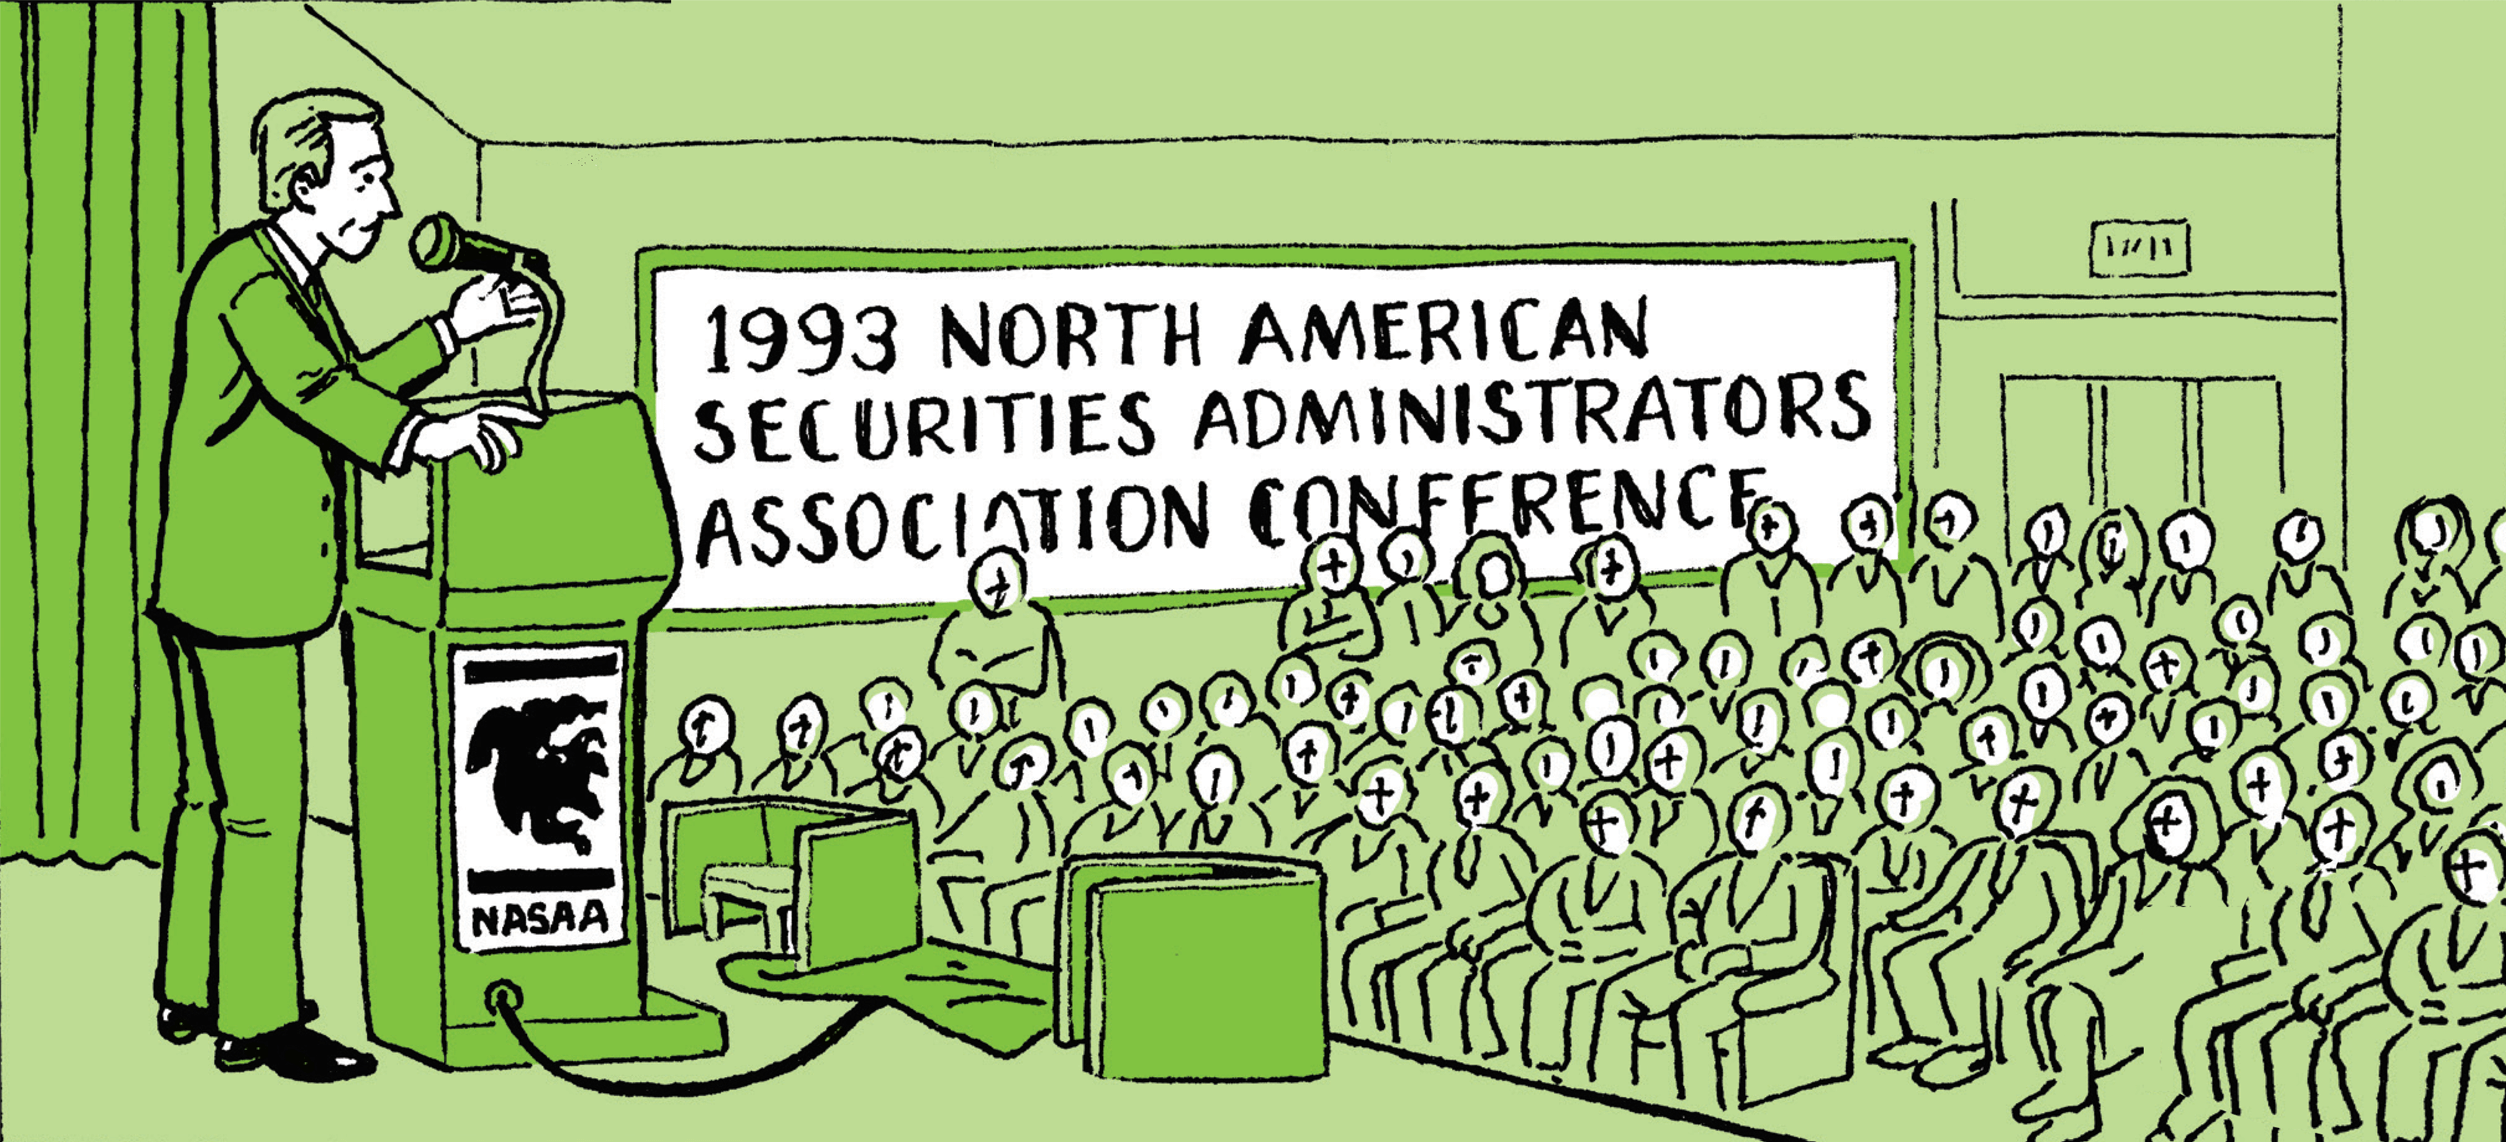 SEC Chairman Arthur Levitt addresses the audience at the 1993 North American Security Administrators Association Conference: Today, the enemy we face is a feeling that our financial markets are becoming so institutionalized, so exotic, and esoteric they no longer serve the small-time entrepreneur or investor looking to claim their share of the American dream.